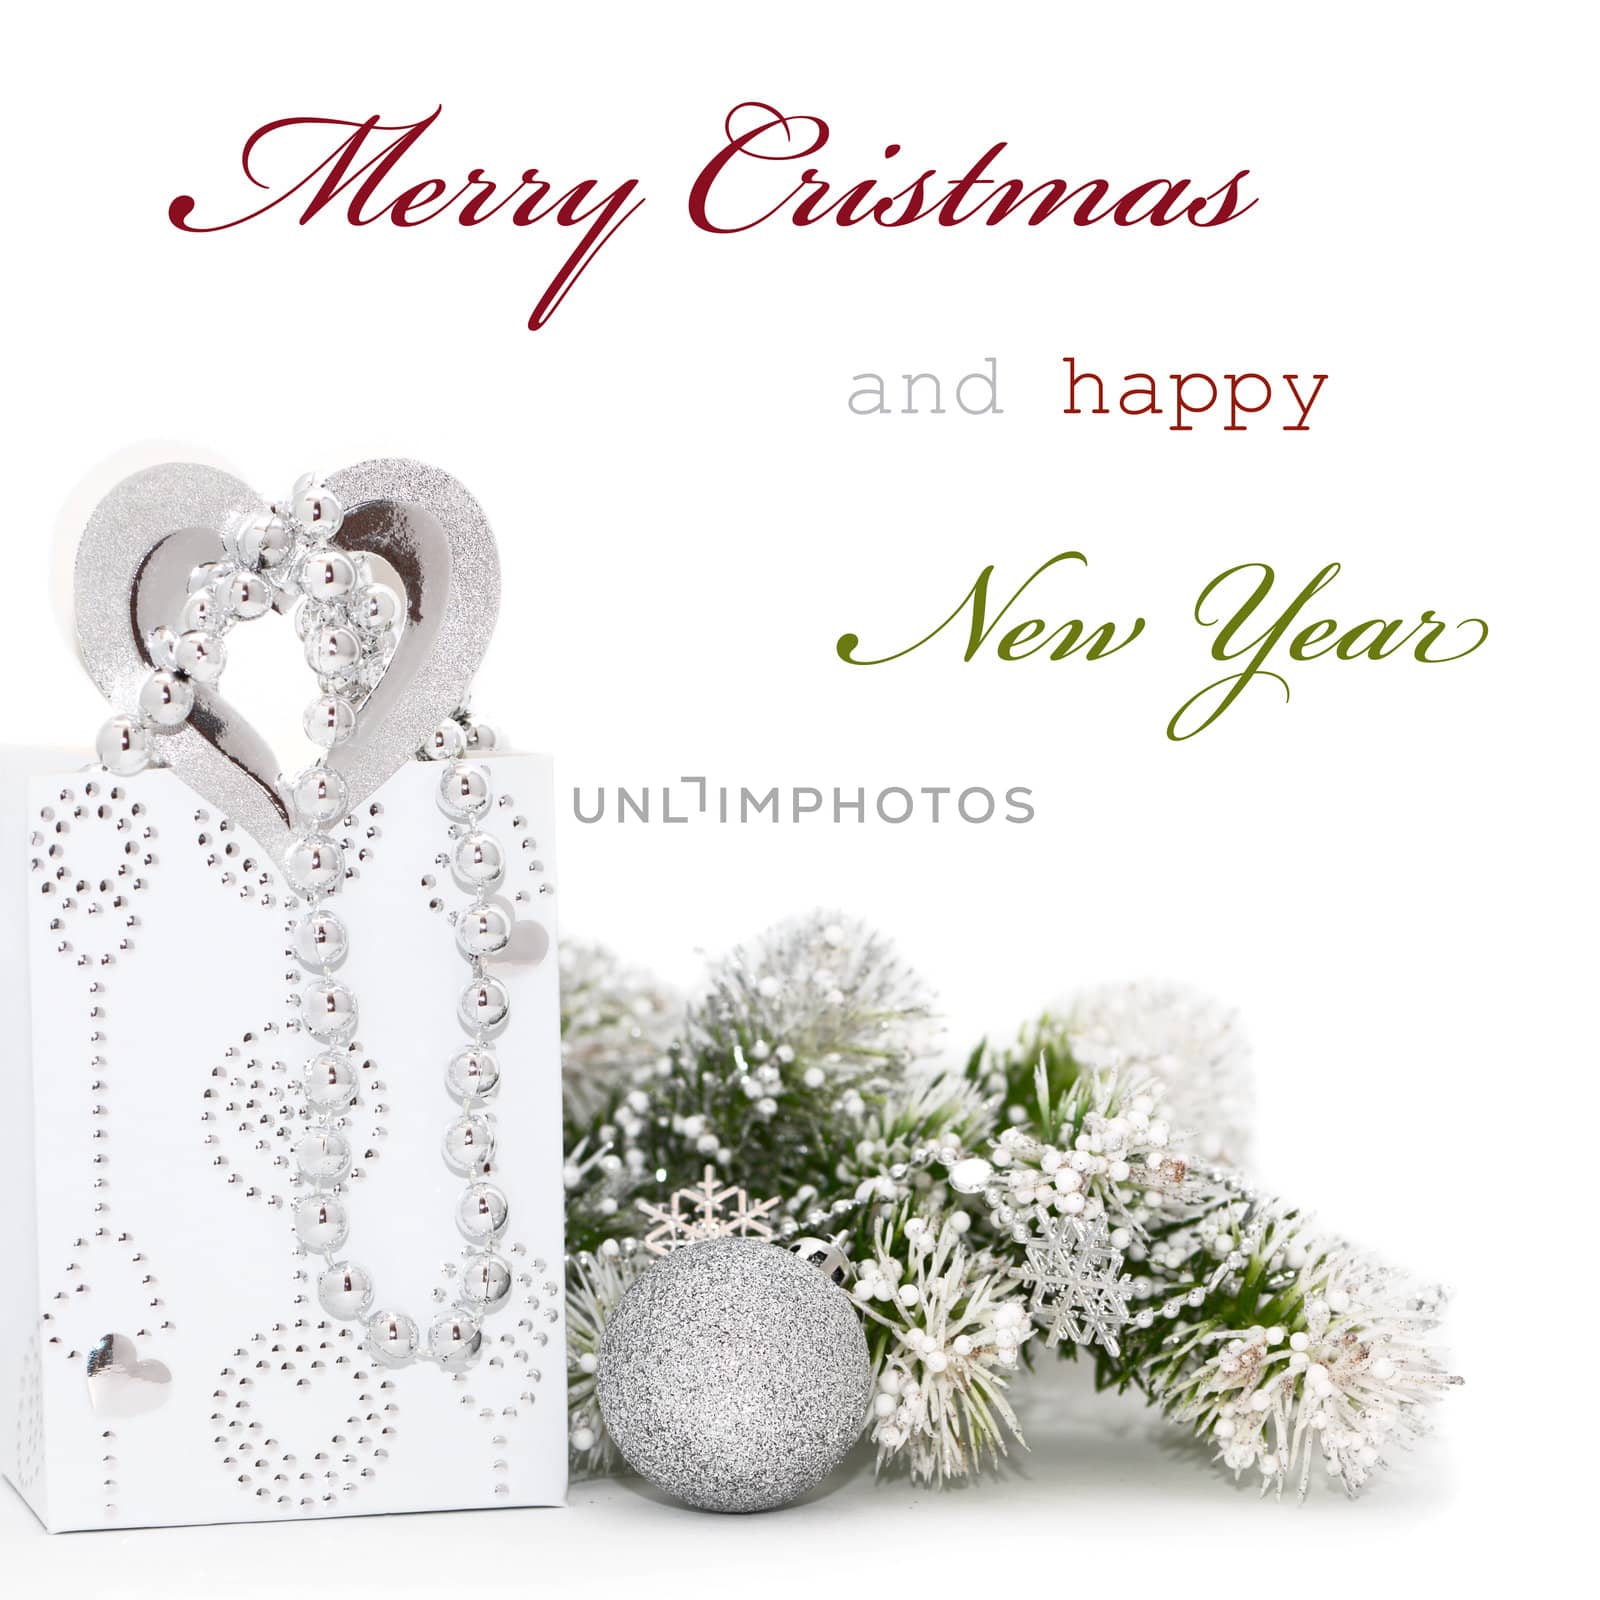 Christmas greeting card with sample text